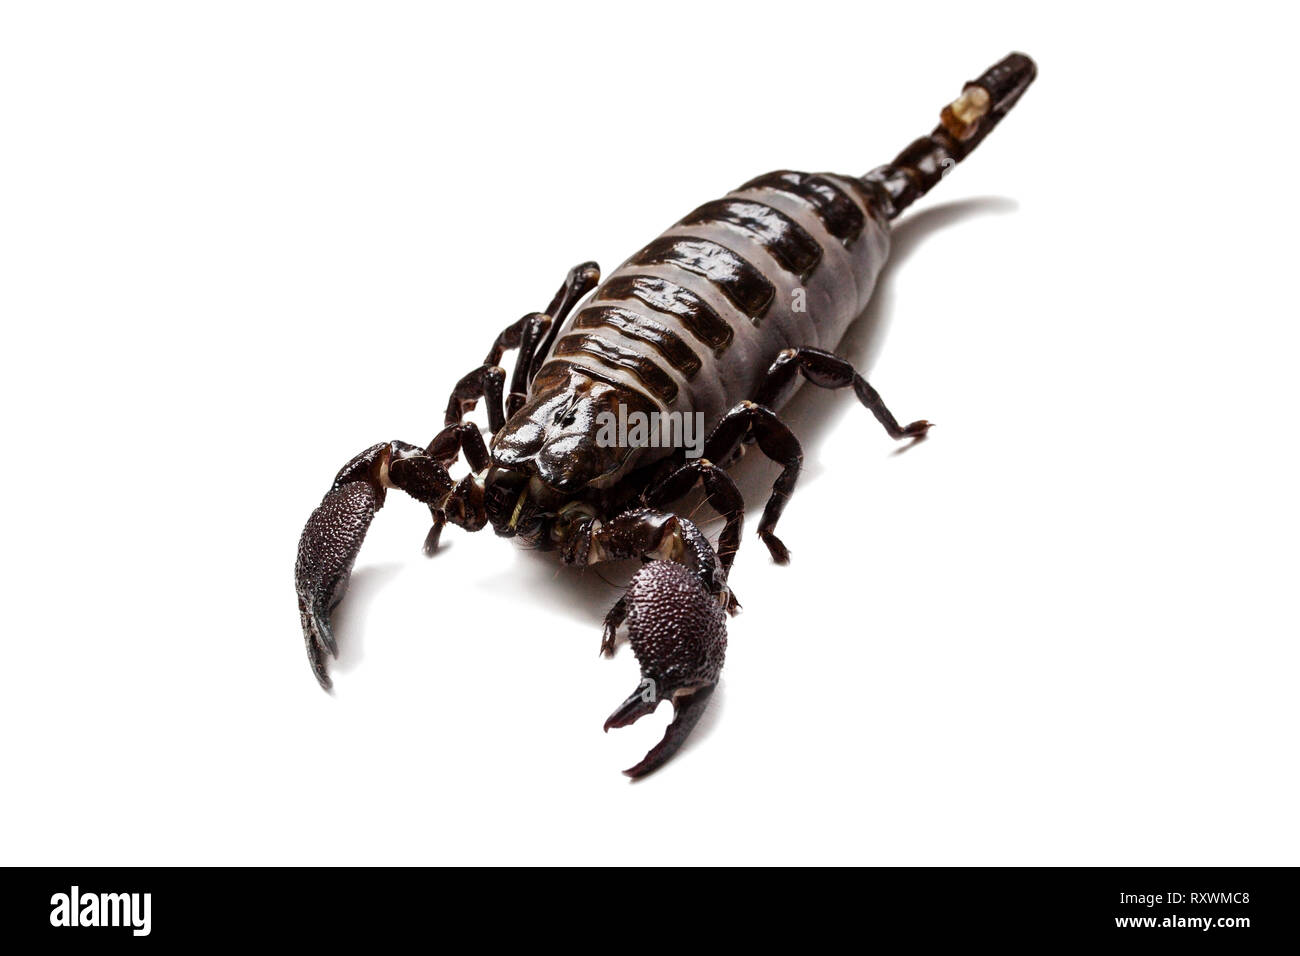 Thick scorpion on a white background Stock Photo